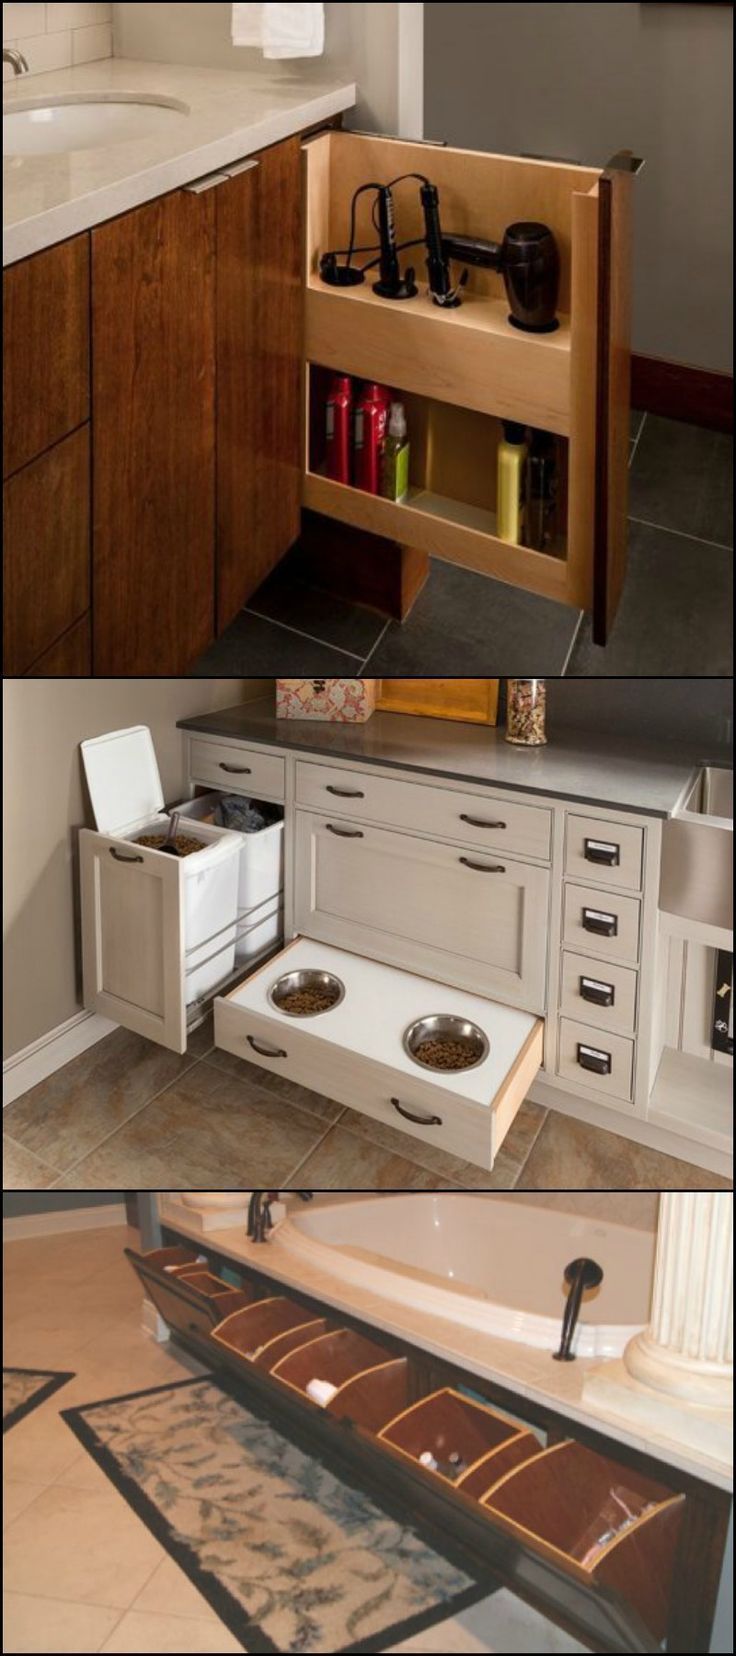 Maximizing Space: Creative Kitchen Ideas for Small Spaces